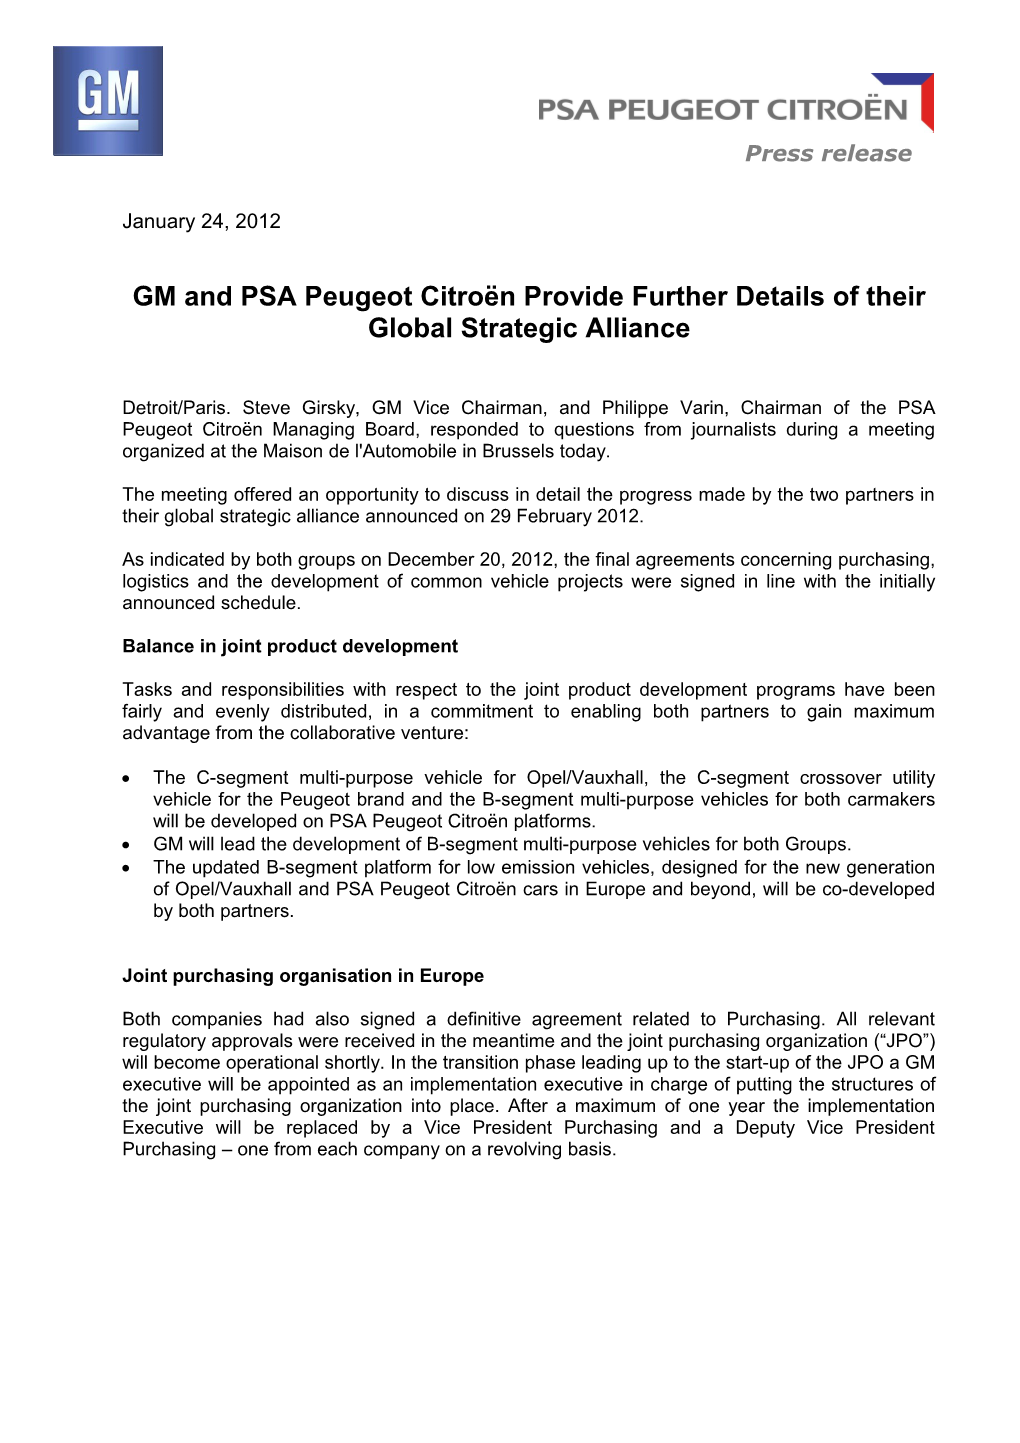 GM and PSA Peugeot Citroën Provide Further Details of Their Global Strategic Alliance